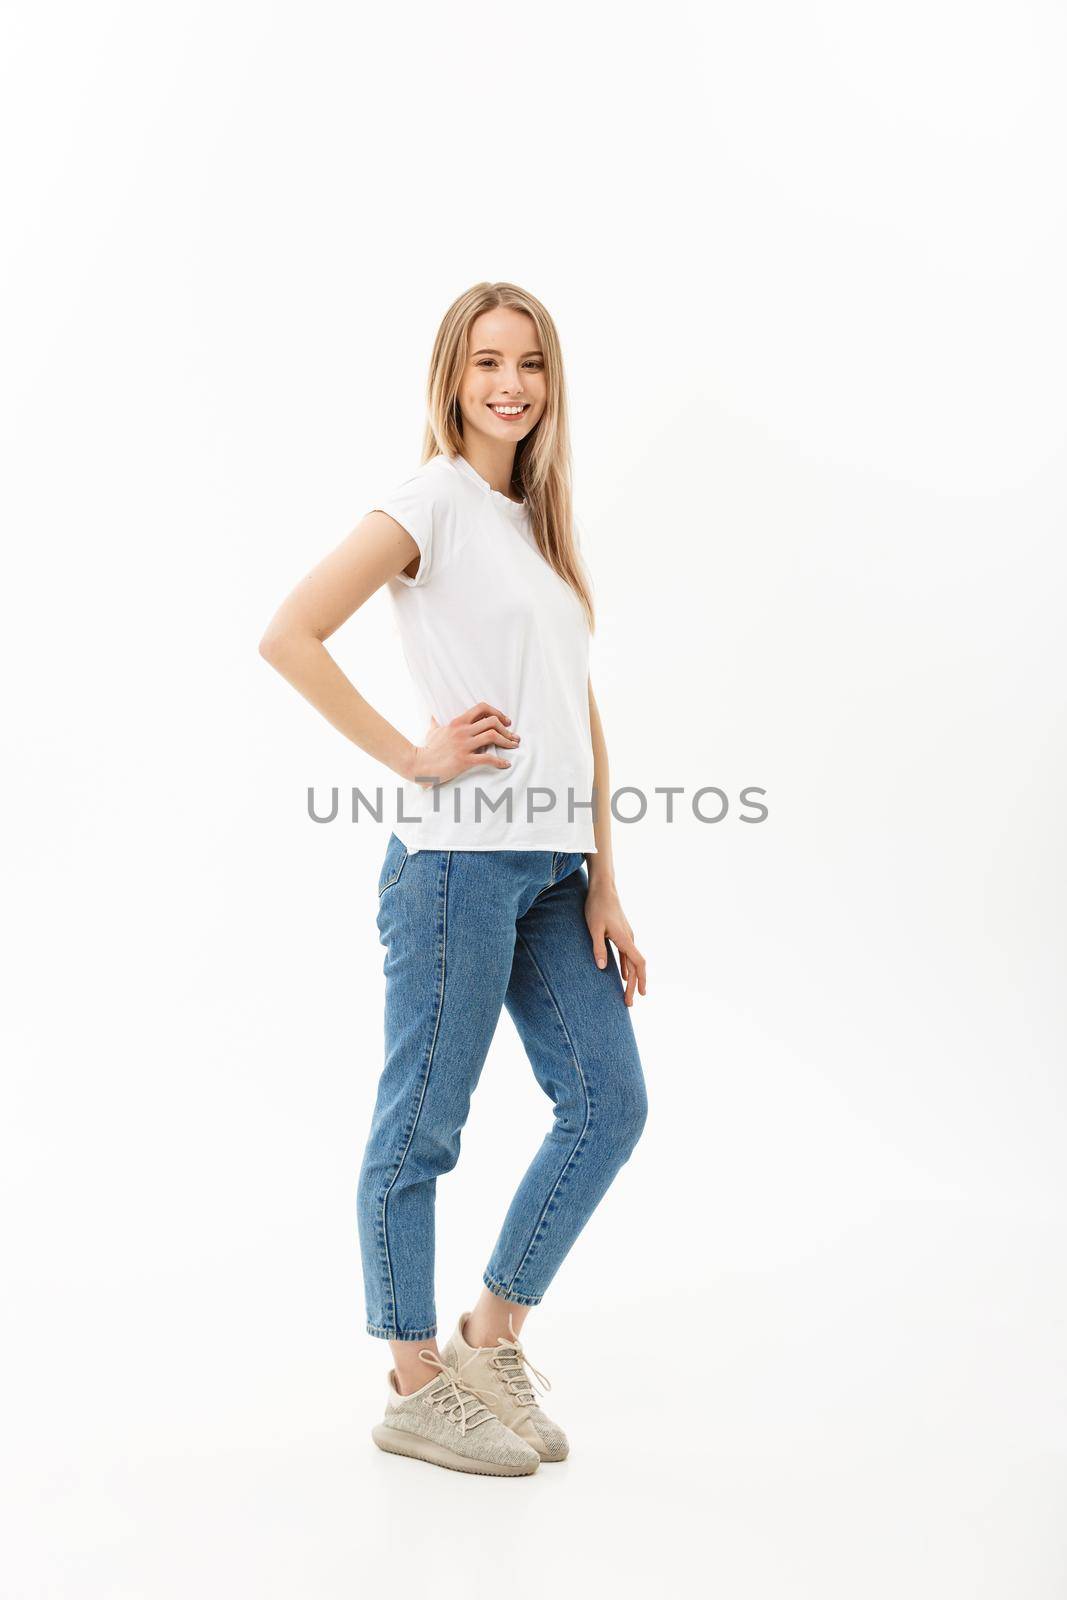 Beautiful standing woman model posing isolated on a white background.